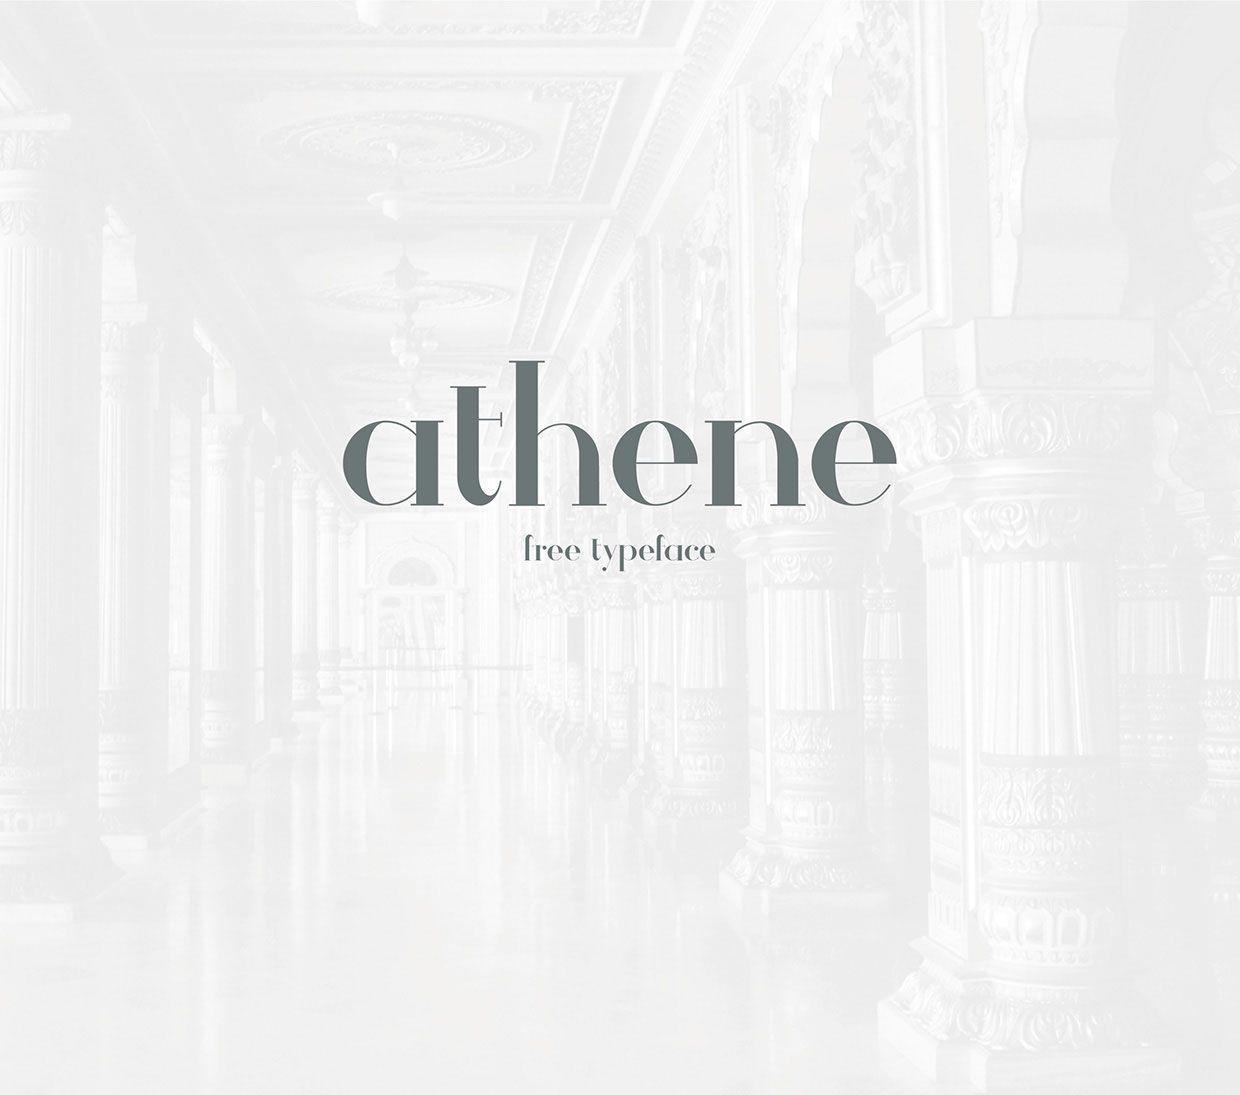 Athene Logo - 108 Best Free Logo Fonts for Your 2016 Brand Design Projects ...